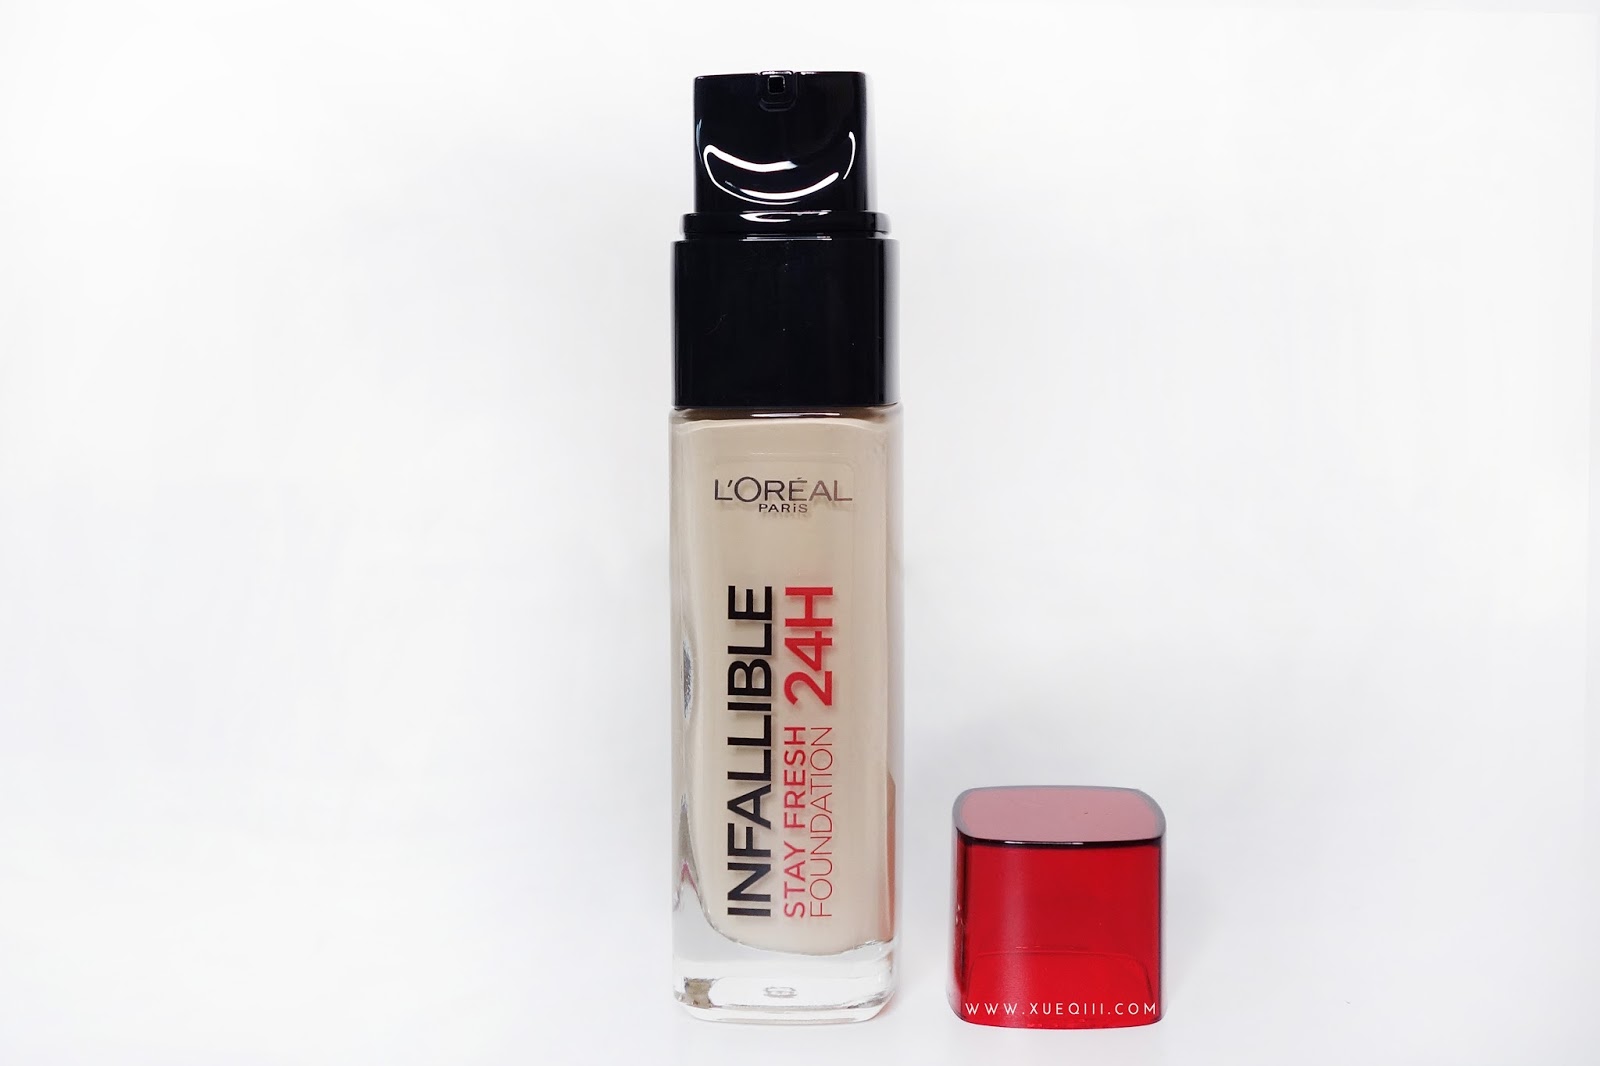 L'Oreal Infallible 24HR Liquid & Powder Foundation Review.